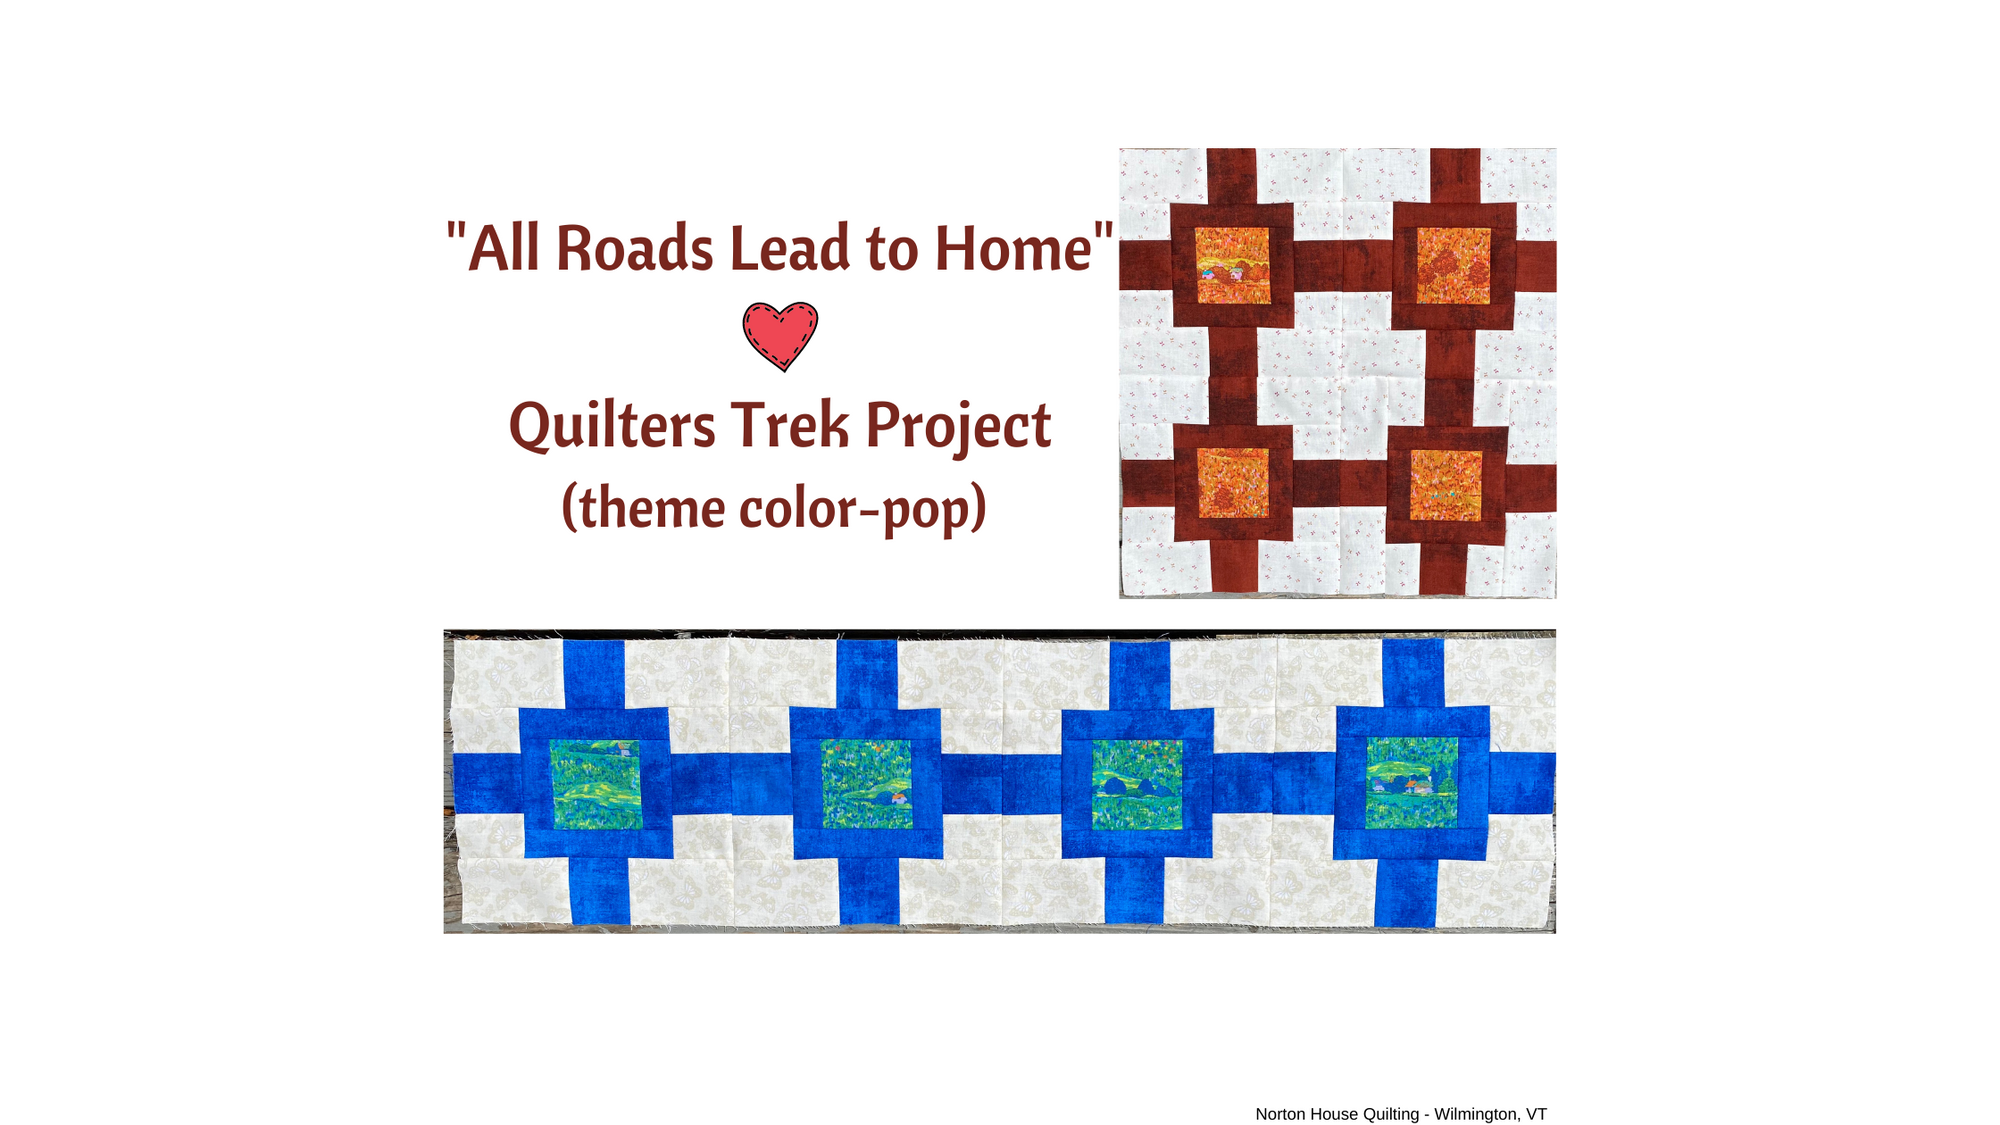 Quilters Trek 2021 - "All Roads Lead to Home"